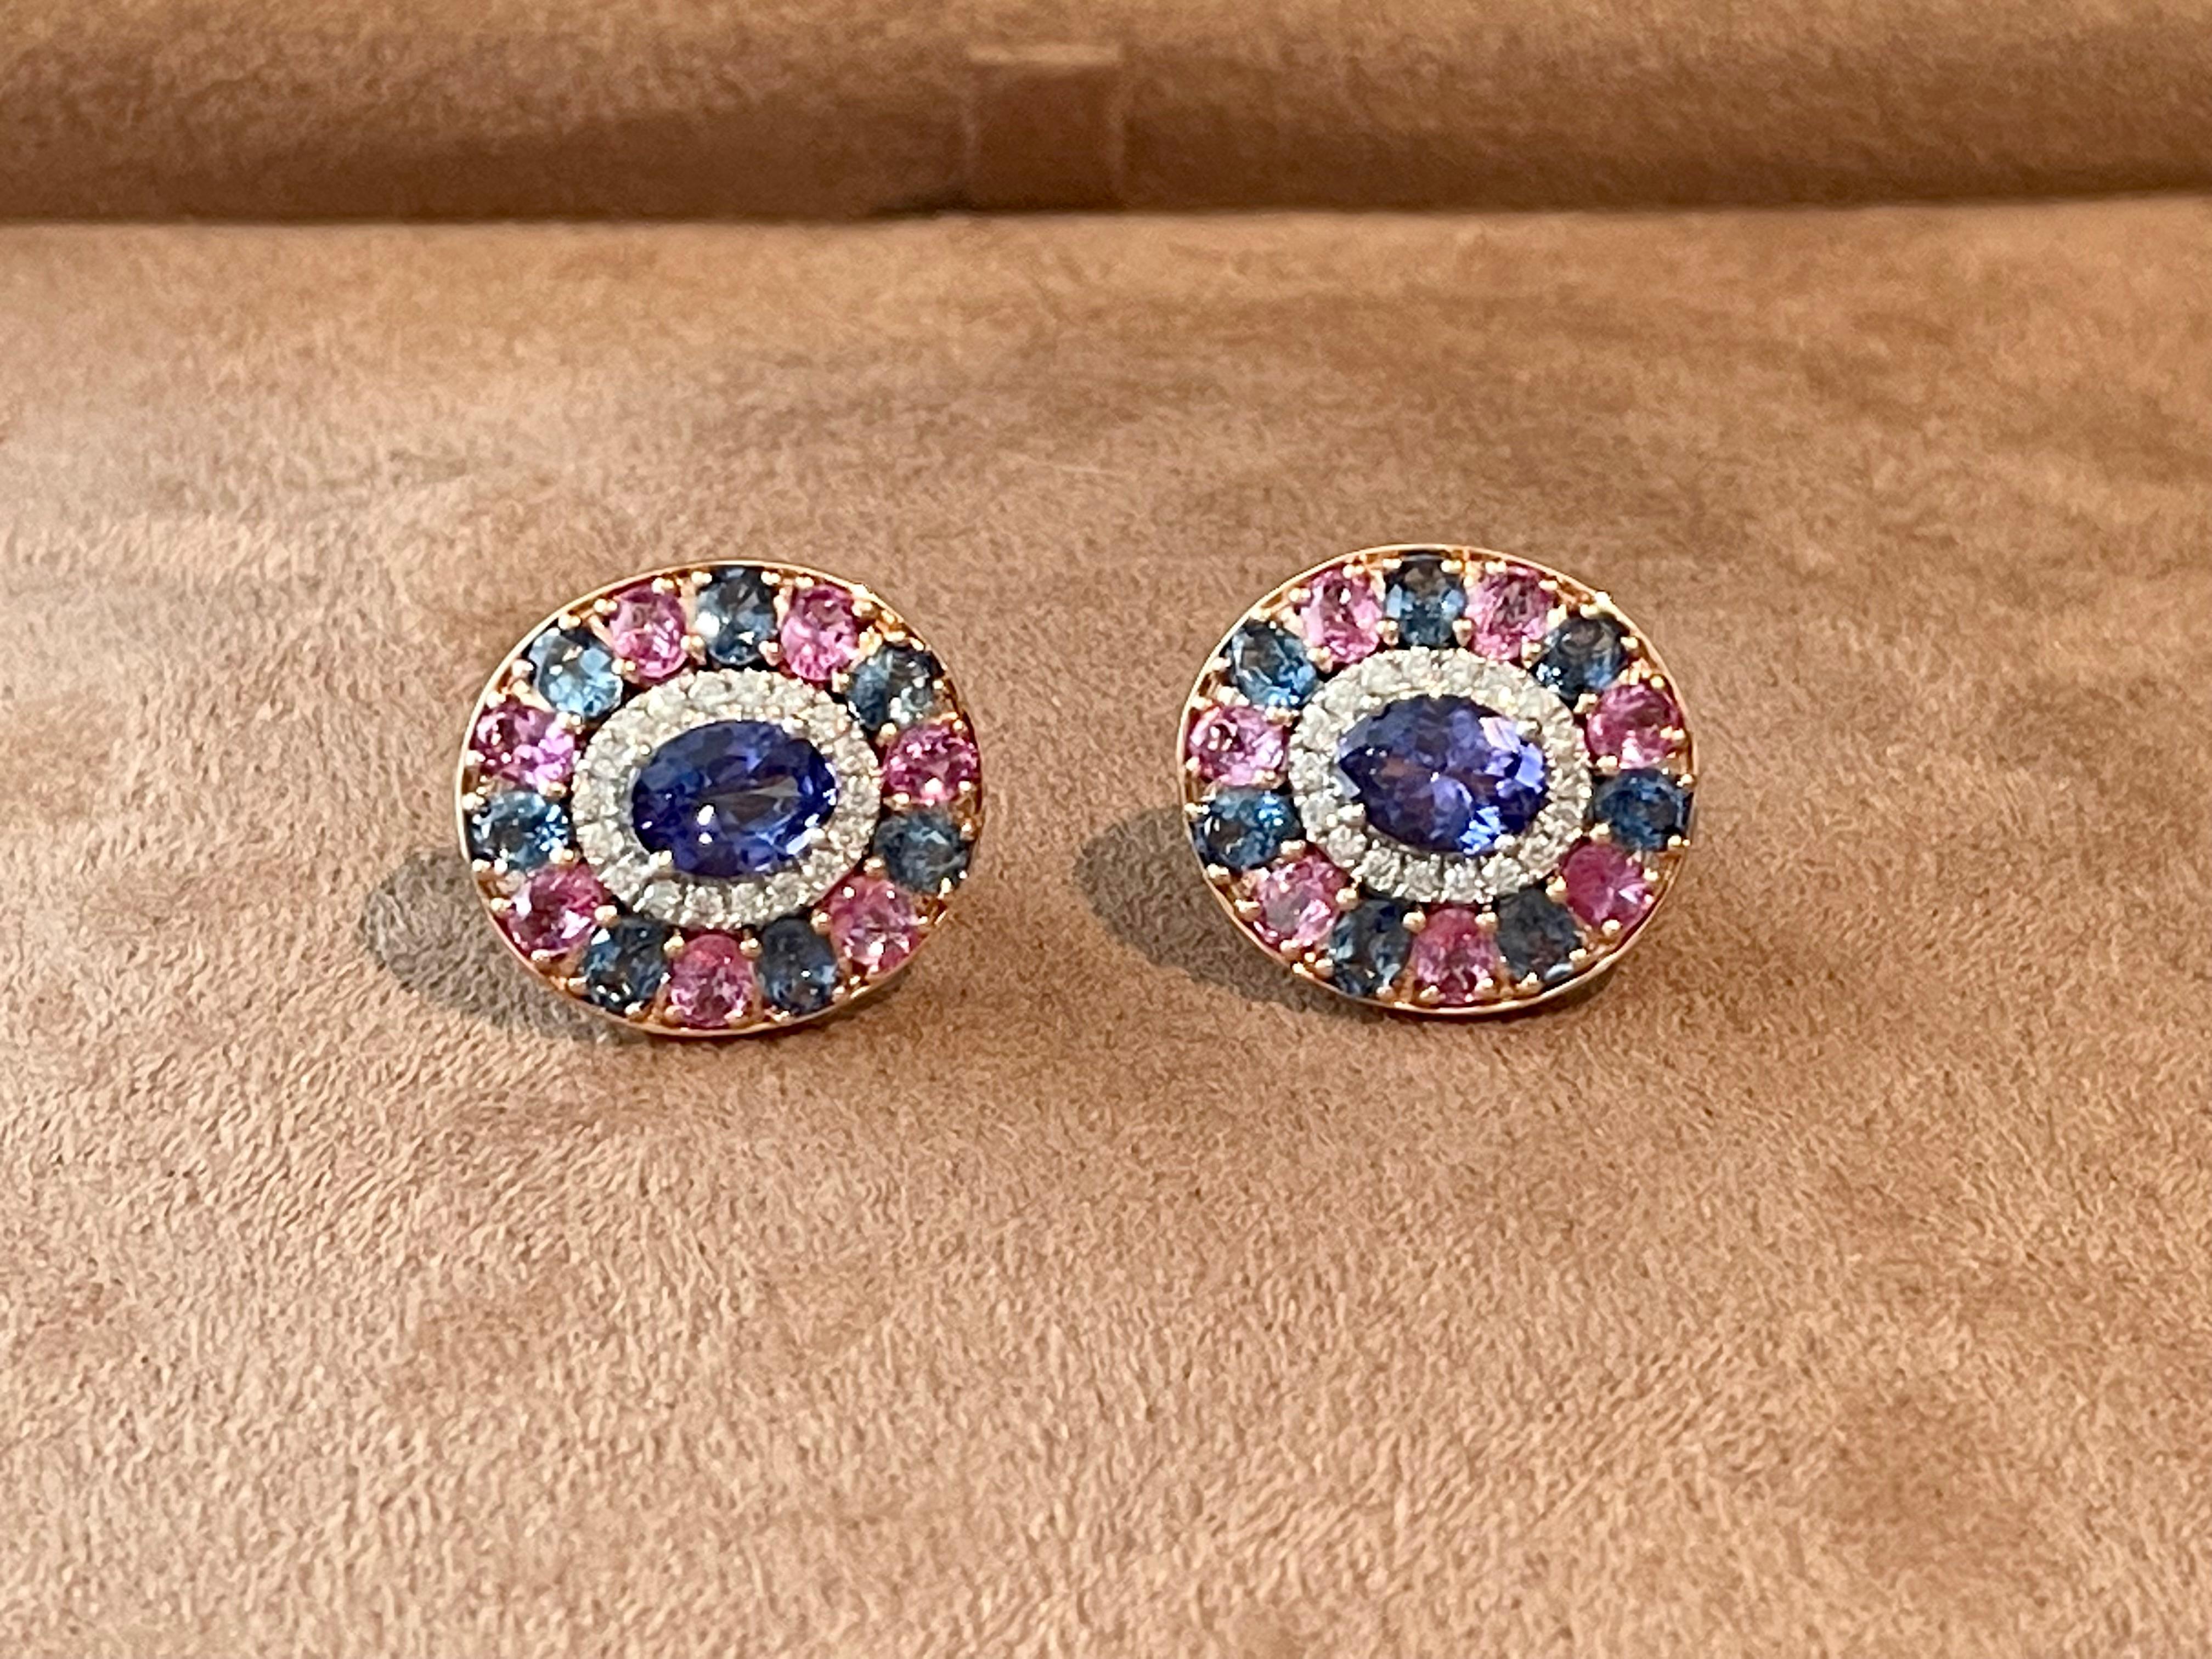 18k Rose Gold Cluster Earrings Tanzanite Pink Sappire Blue Sapphire Diamond For Sale 3